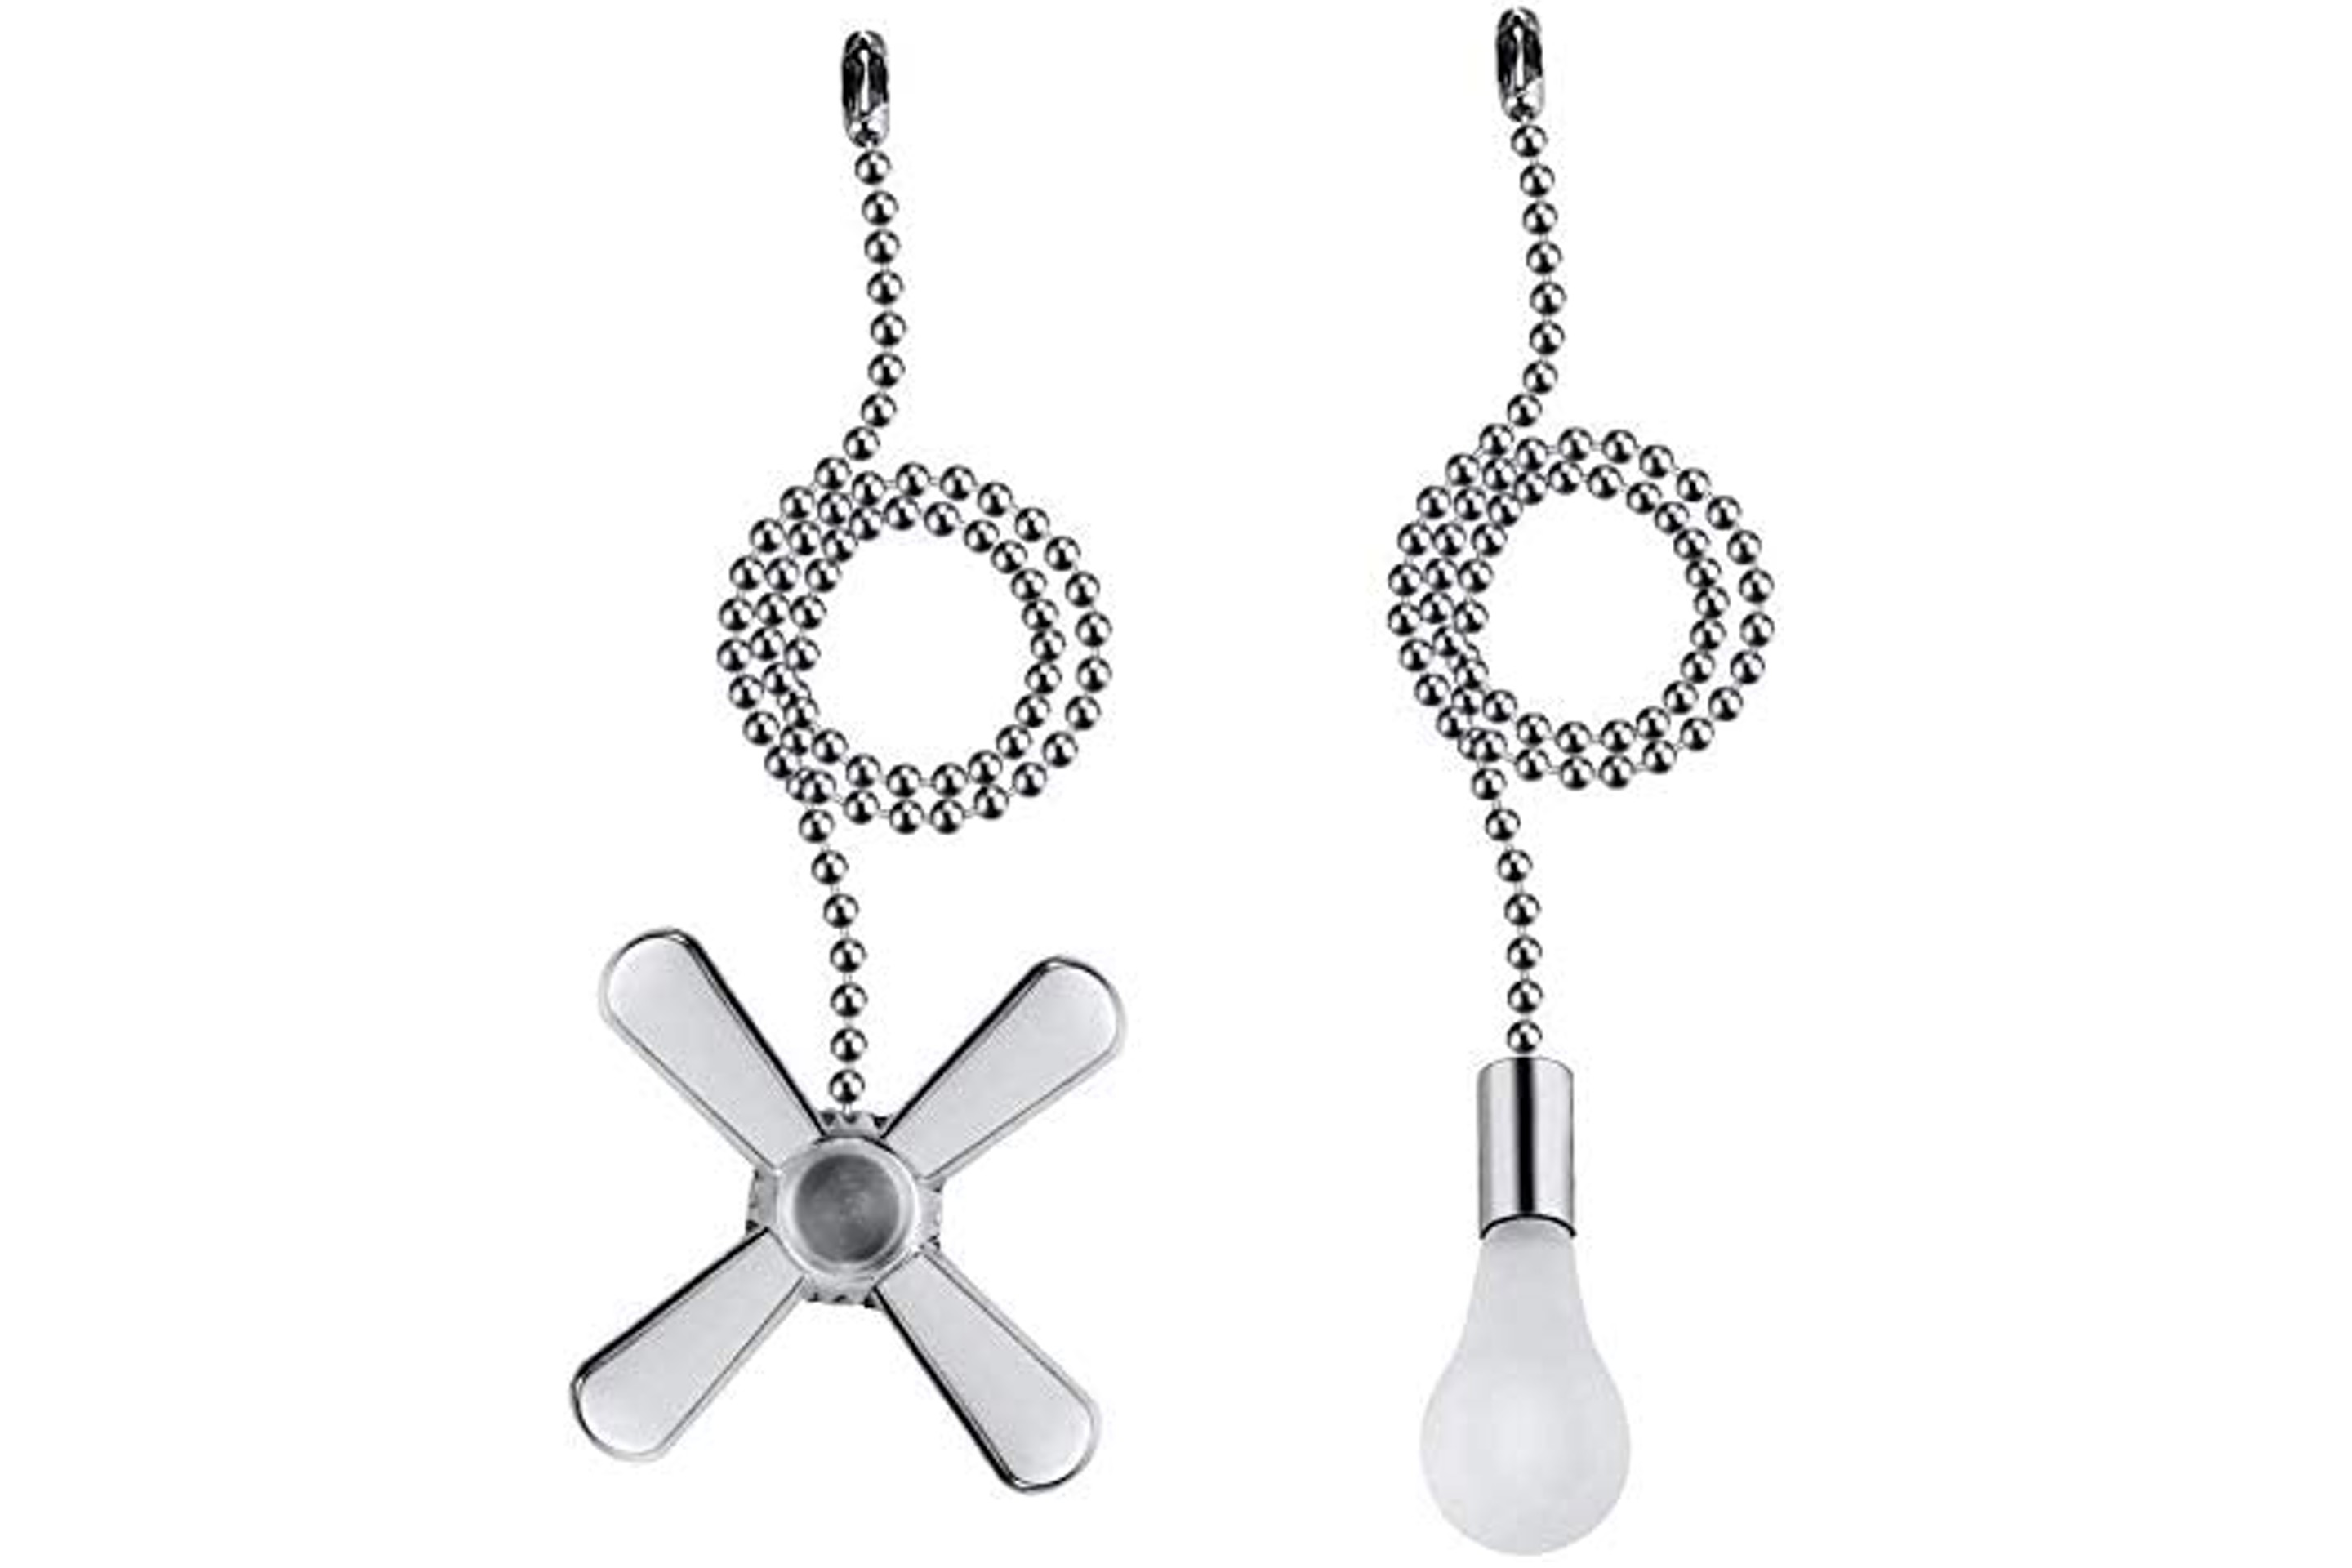 Ceiling Fan Pull Chains